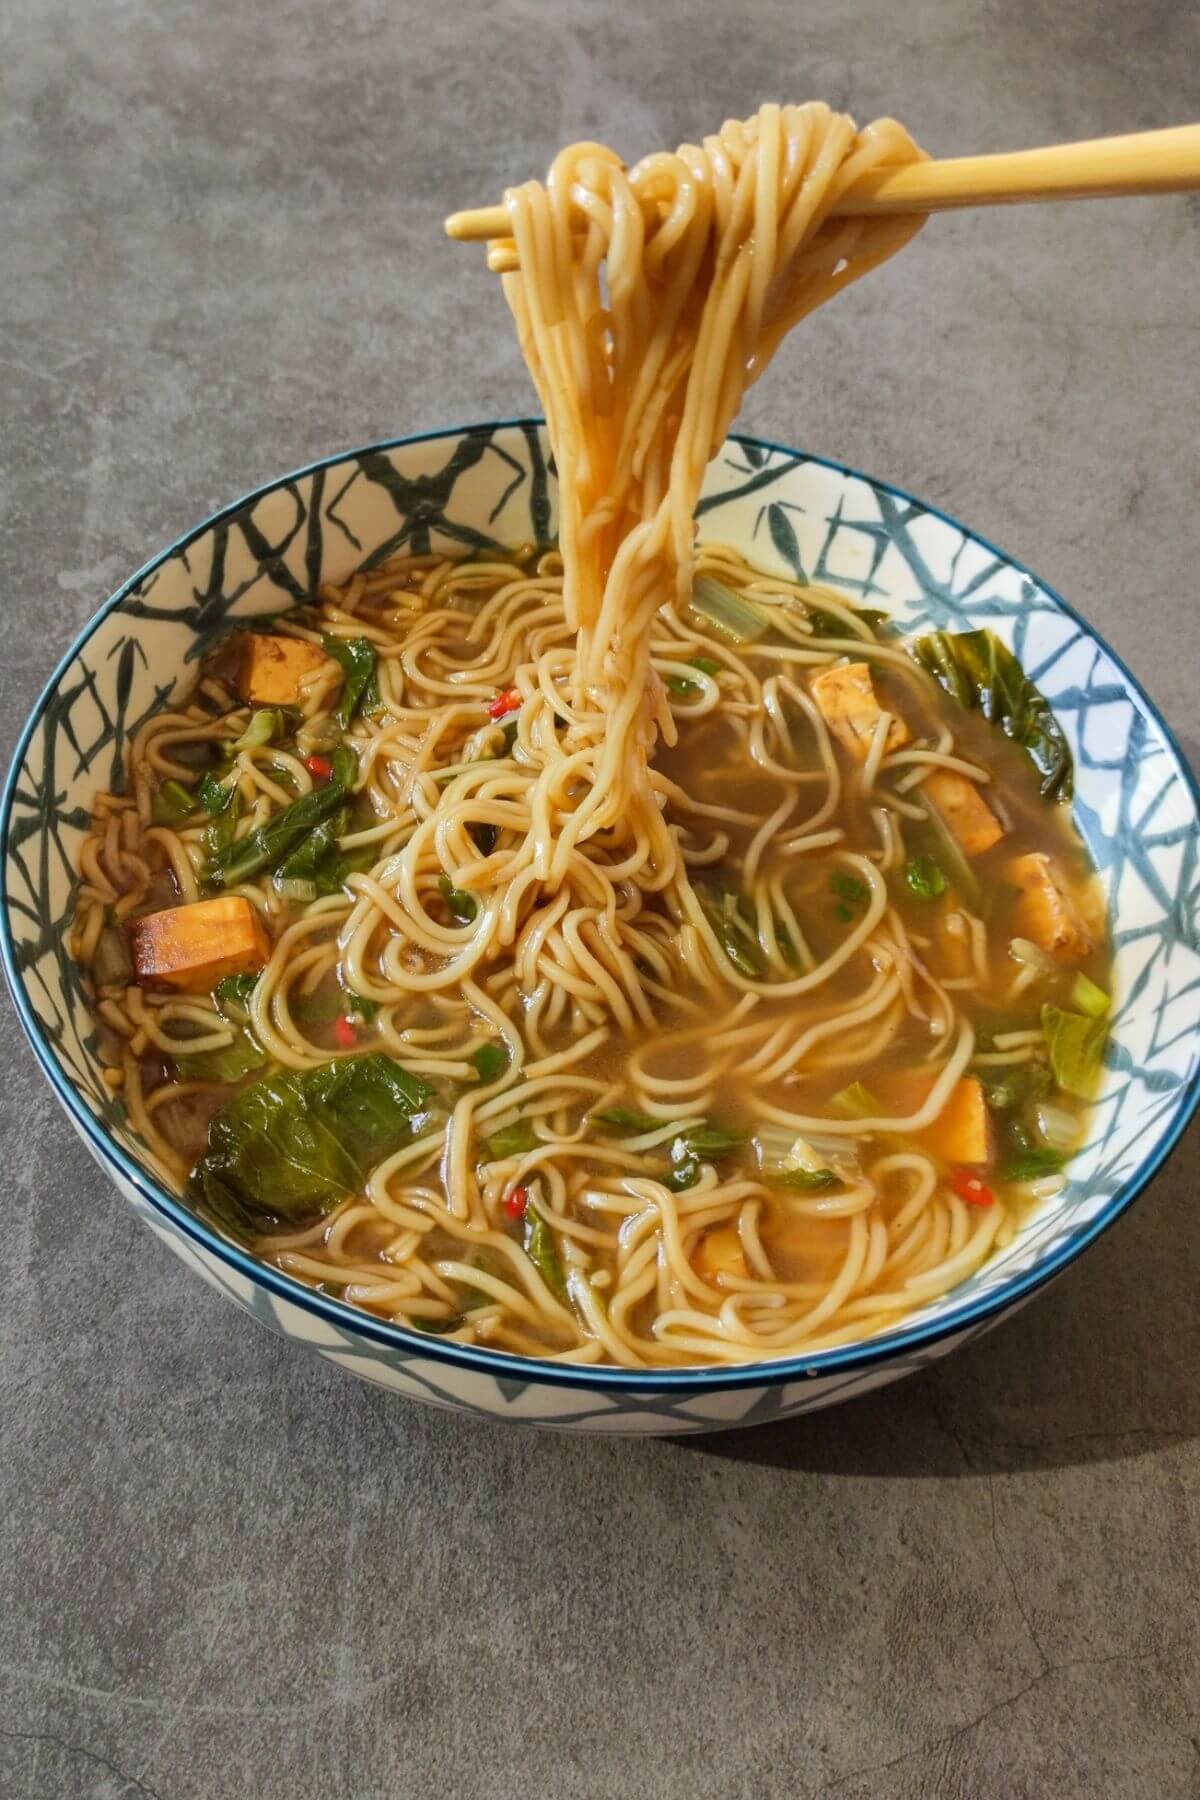 Noodles lifted with chopsticks over a bowl of Chinese noodle soup